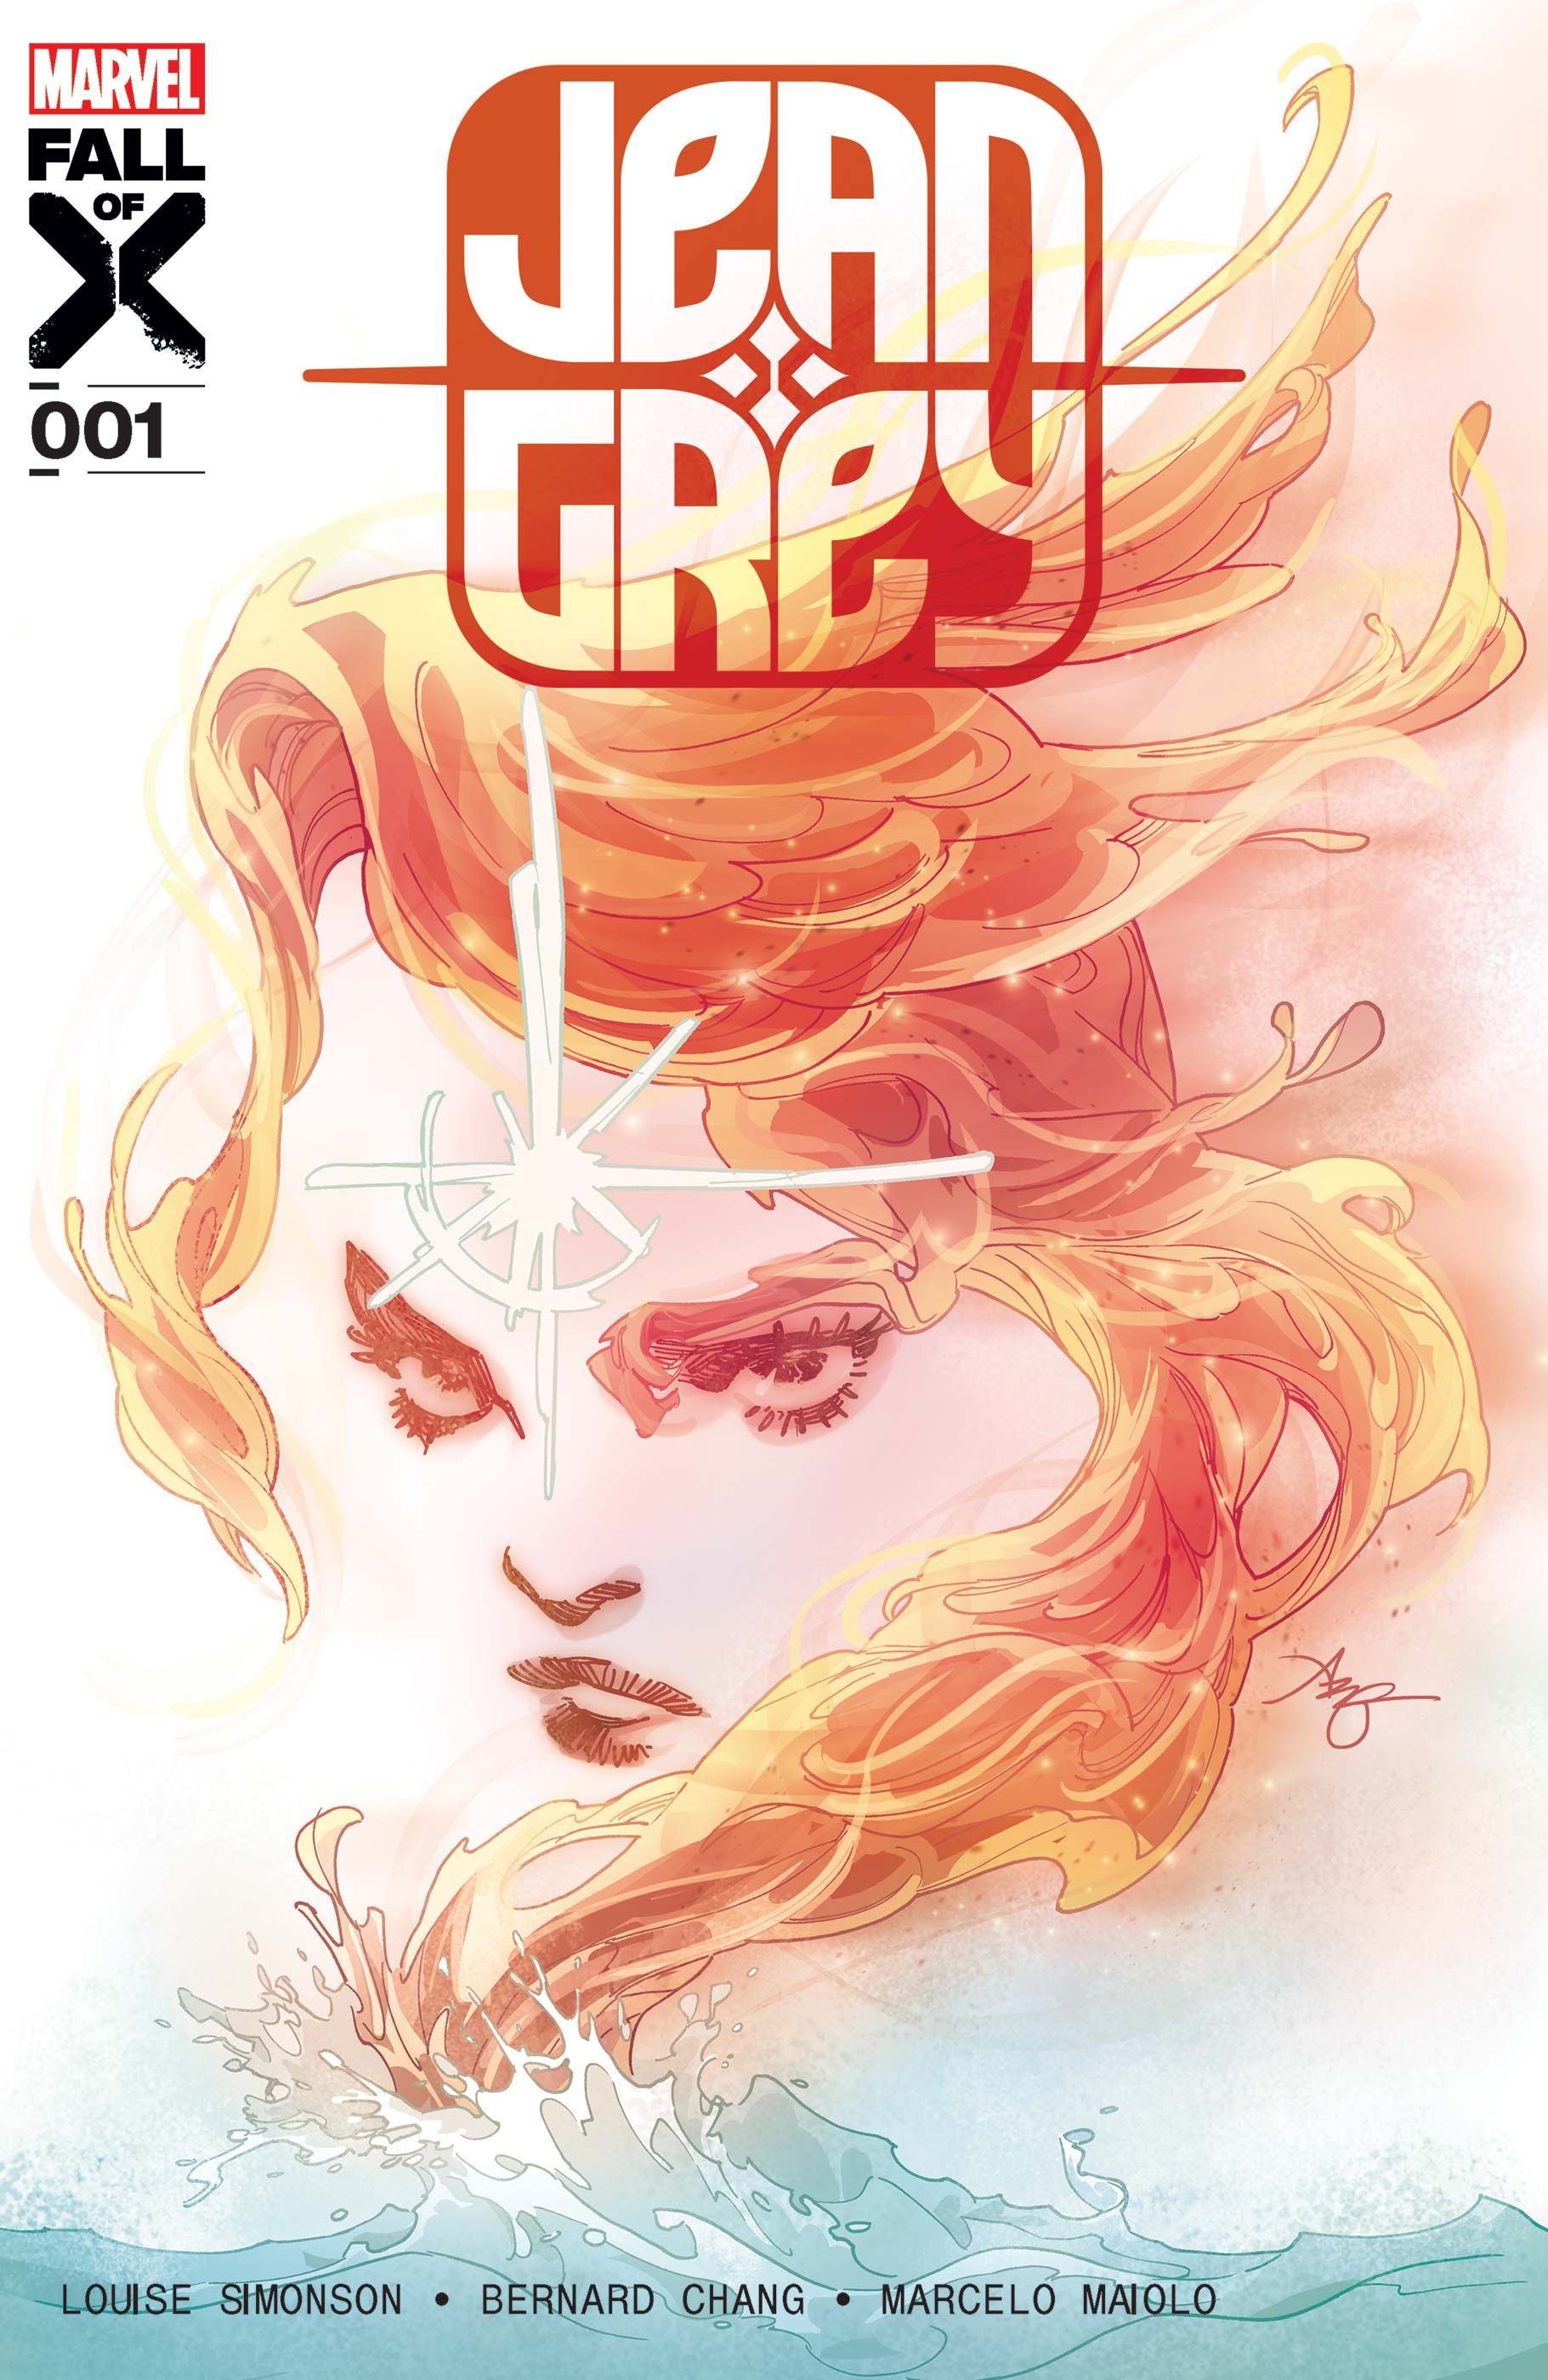 Jean Grey's portrait made of fire above crashing waves